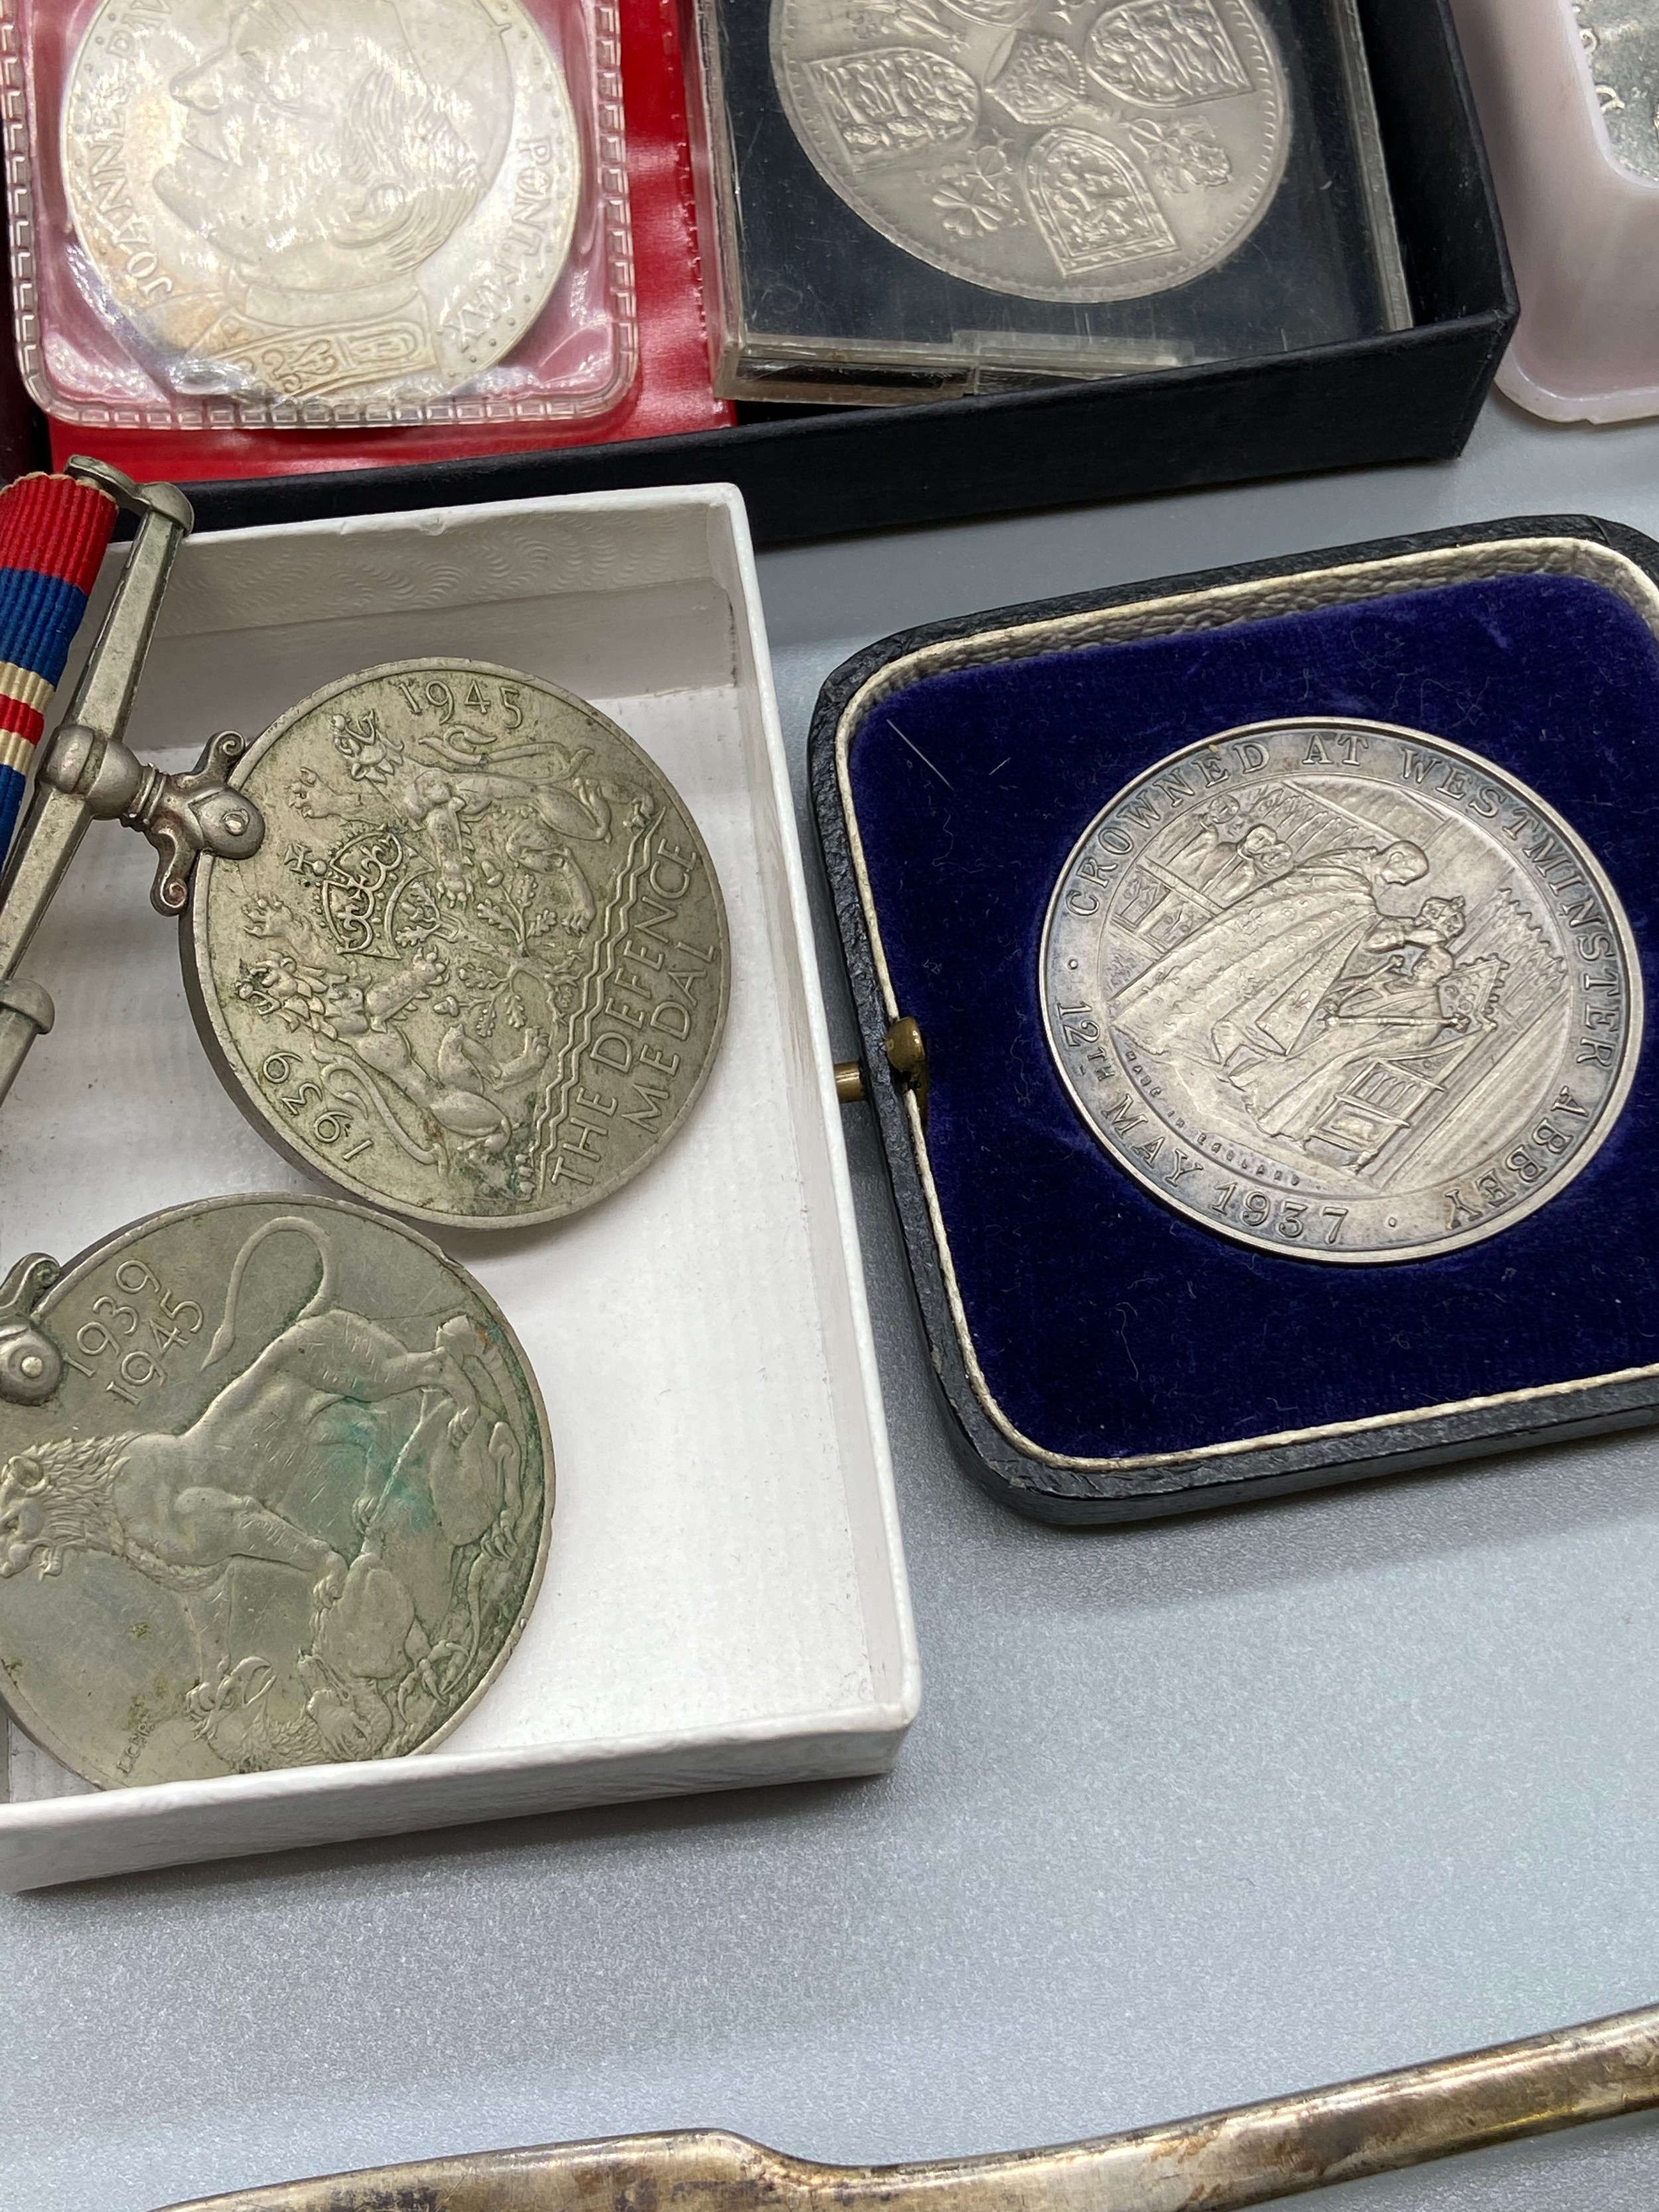 A Selection of crown coins, various British coins, WW2 Medals- no names, and Silver Exeter spoon. - Image 2 of 3